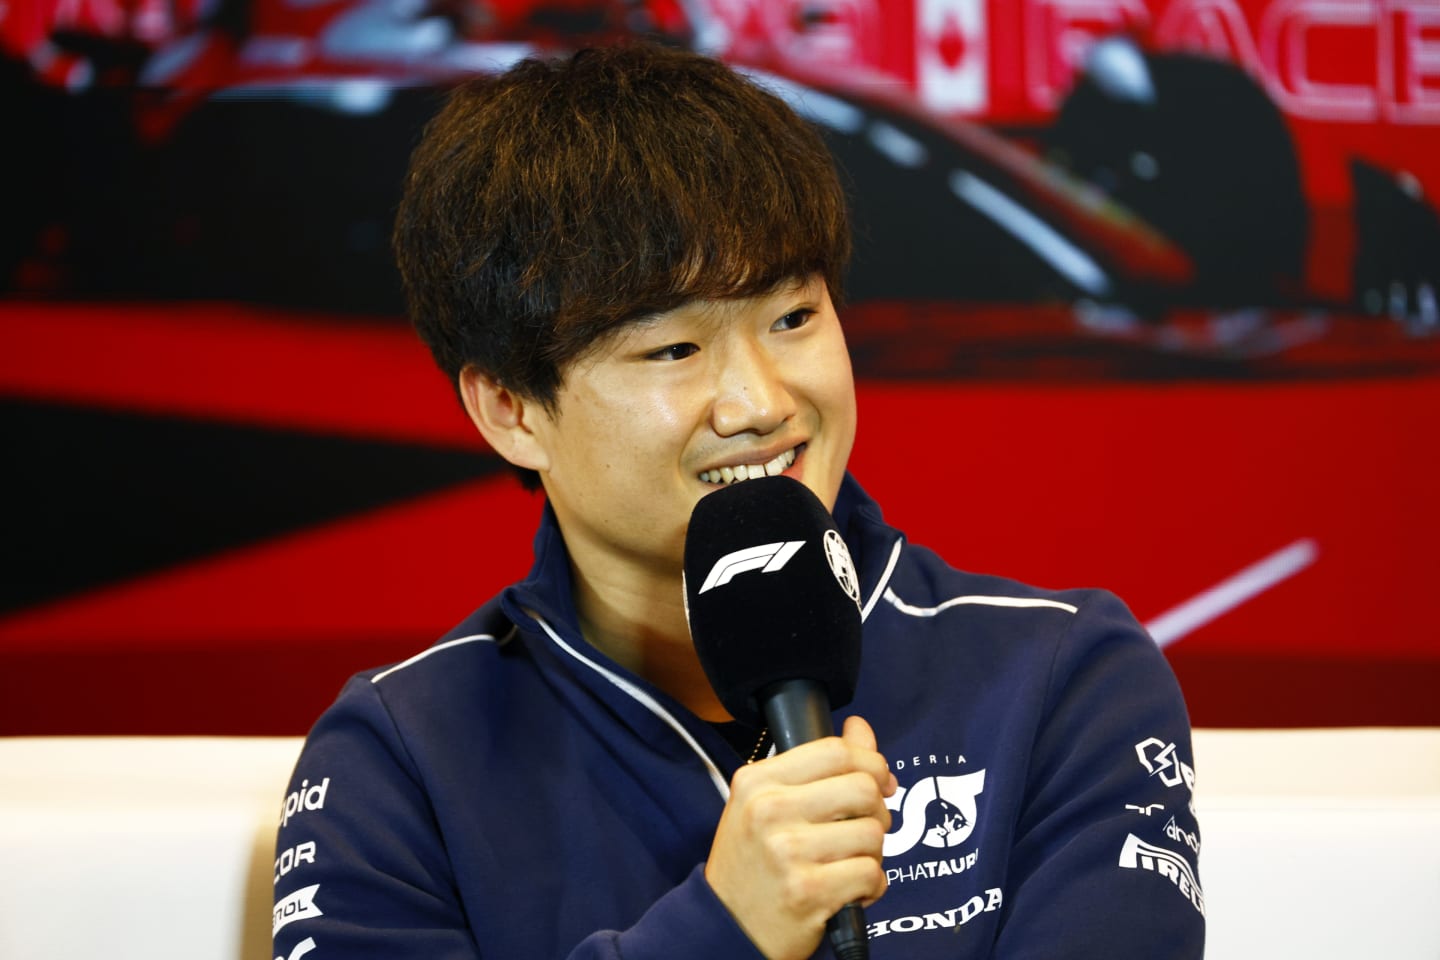 MONTREAL, QUEBEC - JUNE 15: Yuki Tsunoda of Japan and Scuderia AlphaTauri attends the Drivers Press Conference during previews ahead of the F1 Grand Prix of Canada at Circuit Gilles Villeneuve on June 15, 2023 in Montreal, Quebec. (Photo by Jared C. Tilton/Getty Images)